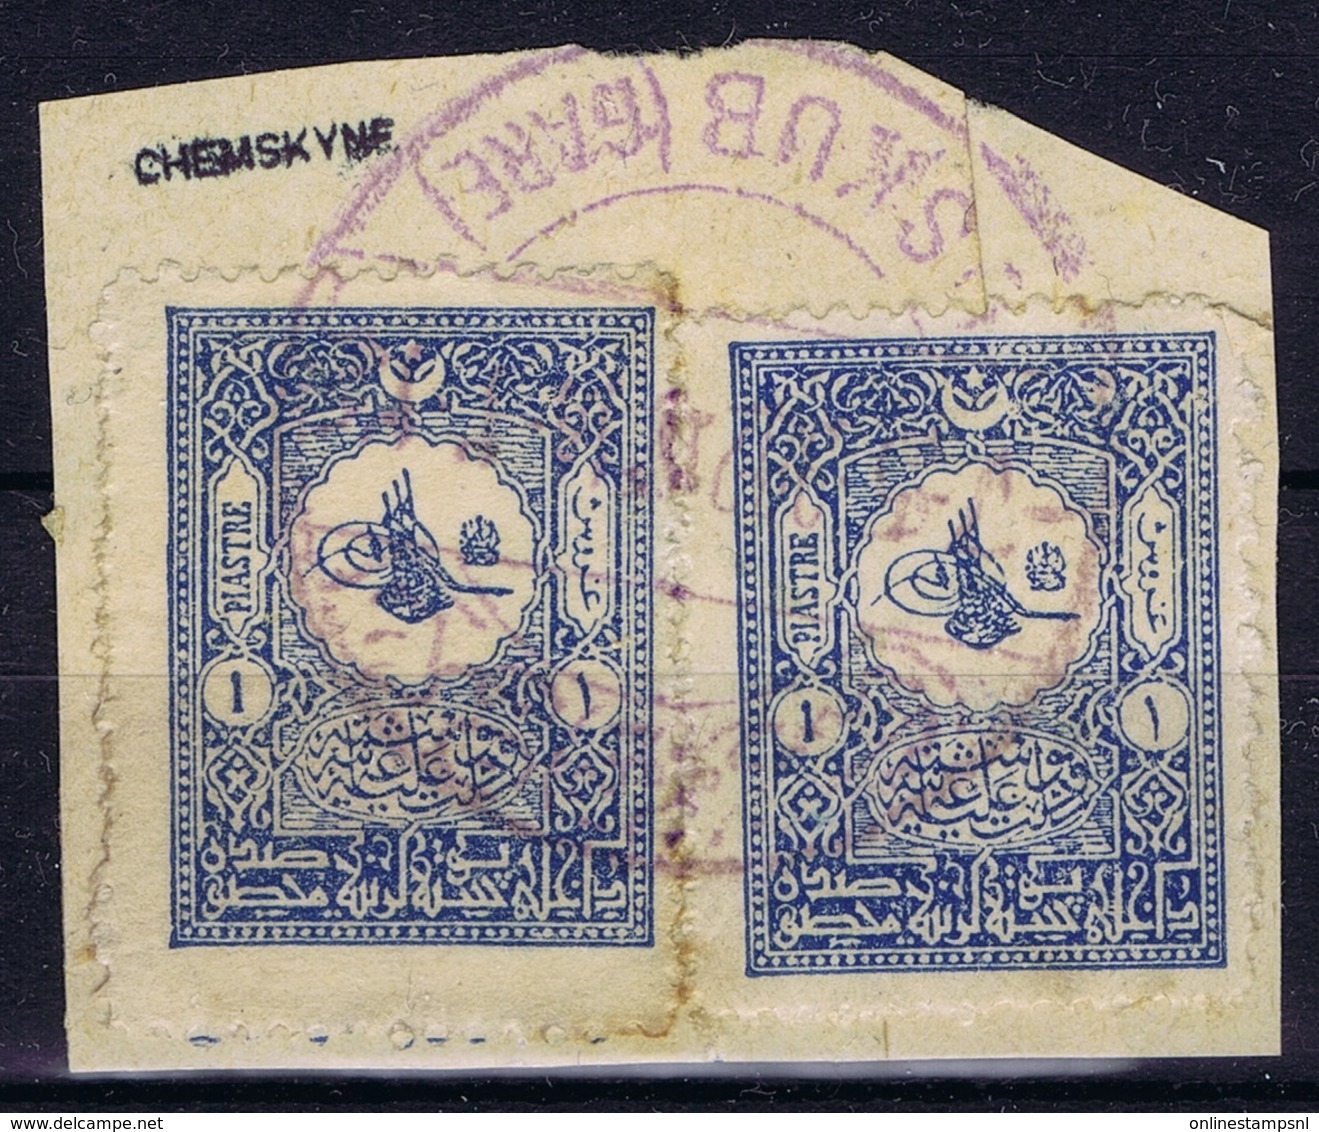 Ottoman Stamps With European CanceL  USKUB GARE  SKOPJE NORTH MACEDONIA Signiert /signed/ Signé - Oblitérés